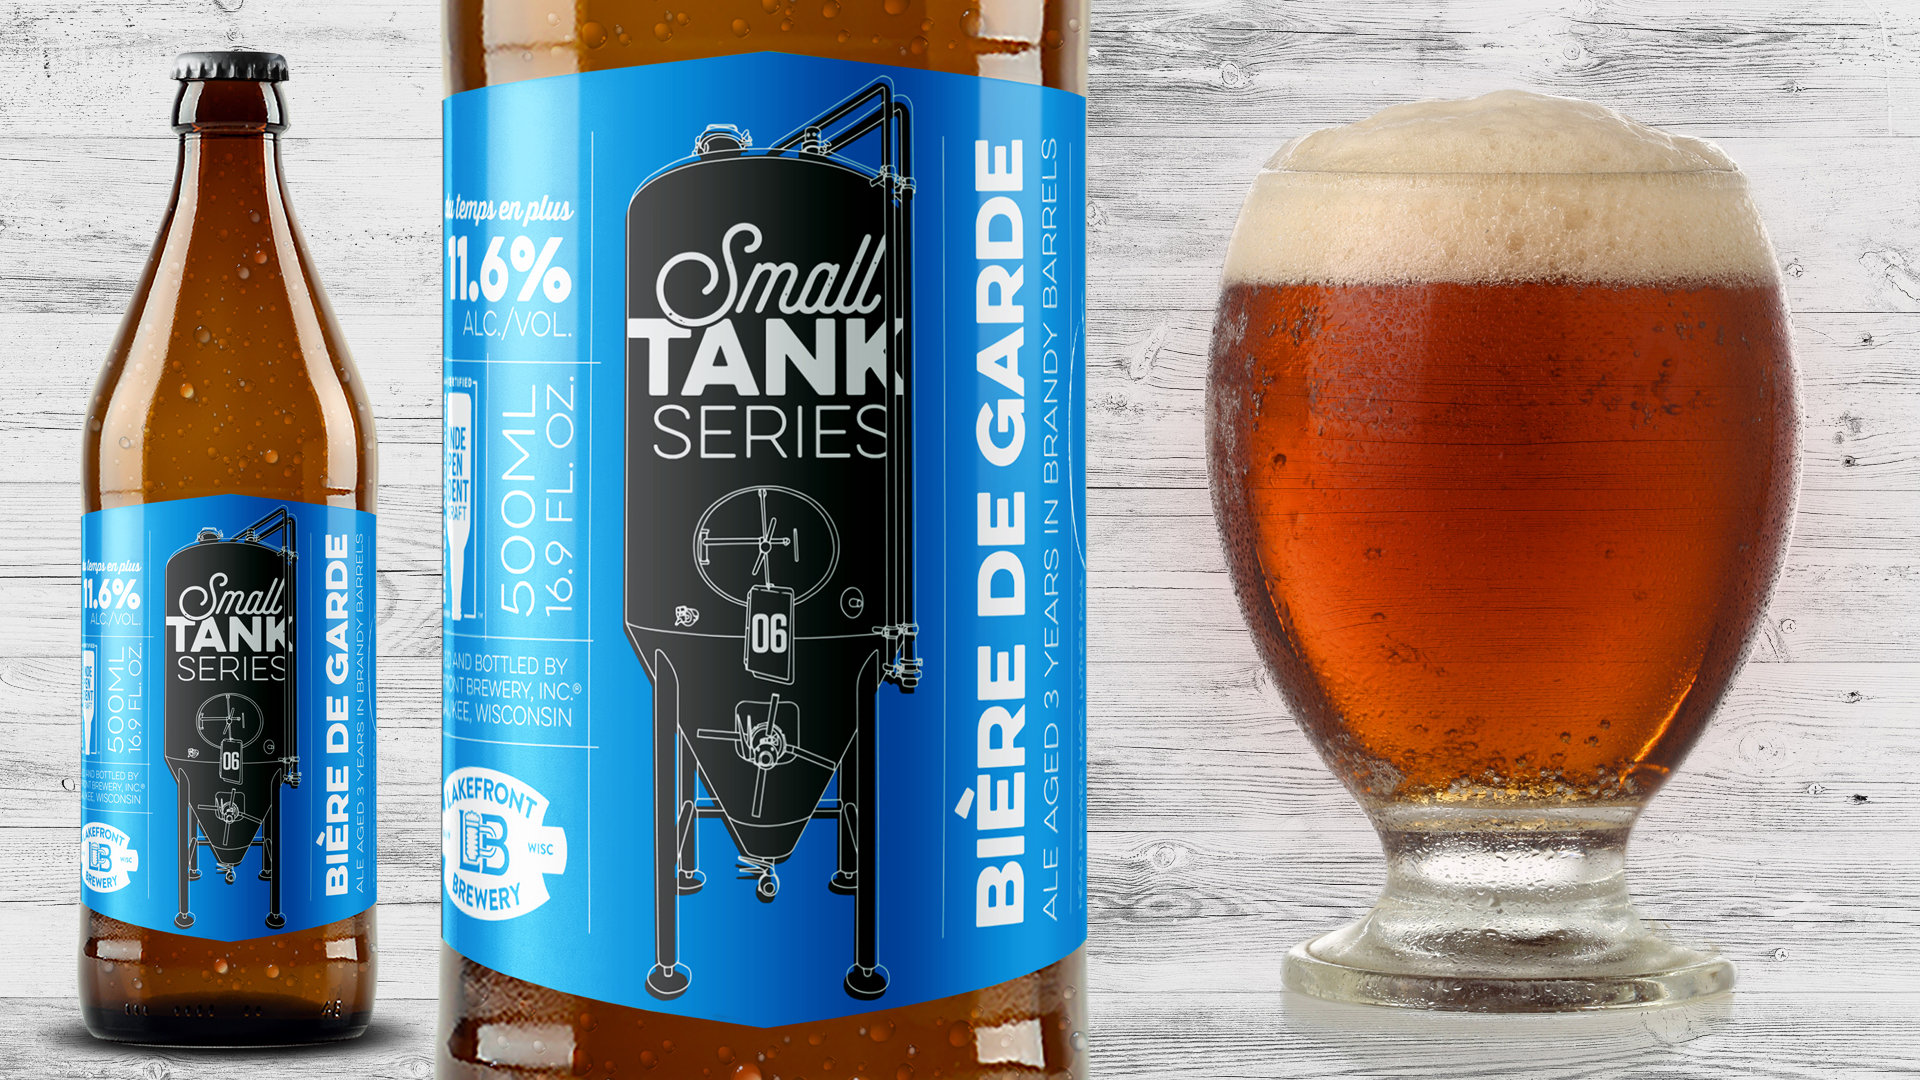 Lakefront Brewery Releases #06 Small Tank Series July 7